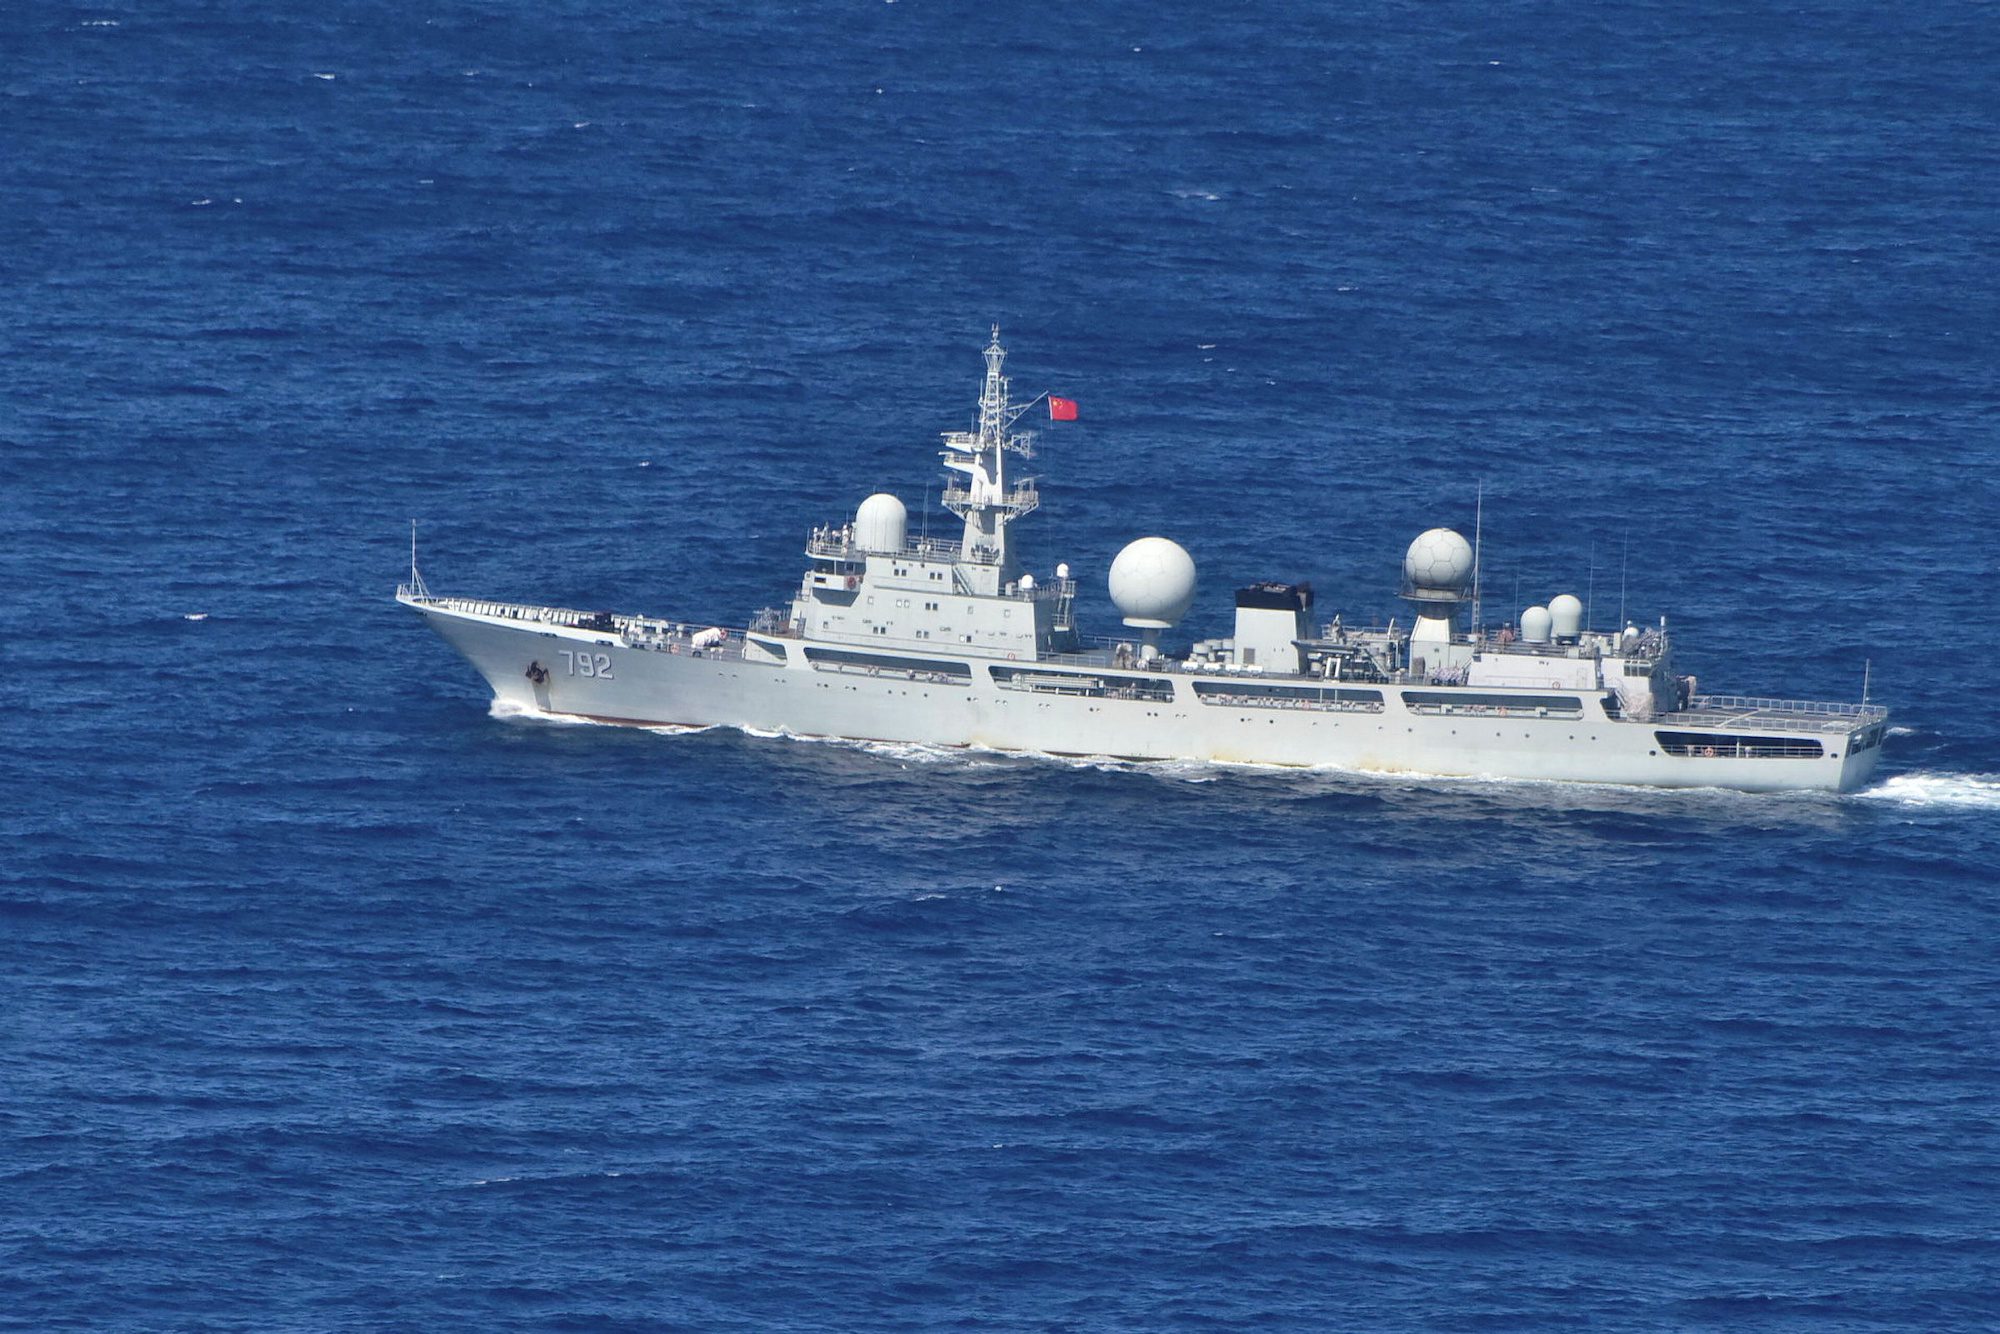 Australia ‘Concerned’ By Chinese Spy Ship Off Its Coast